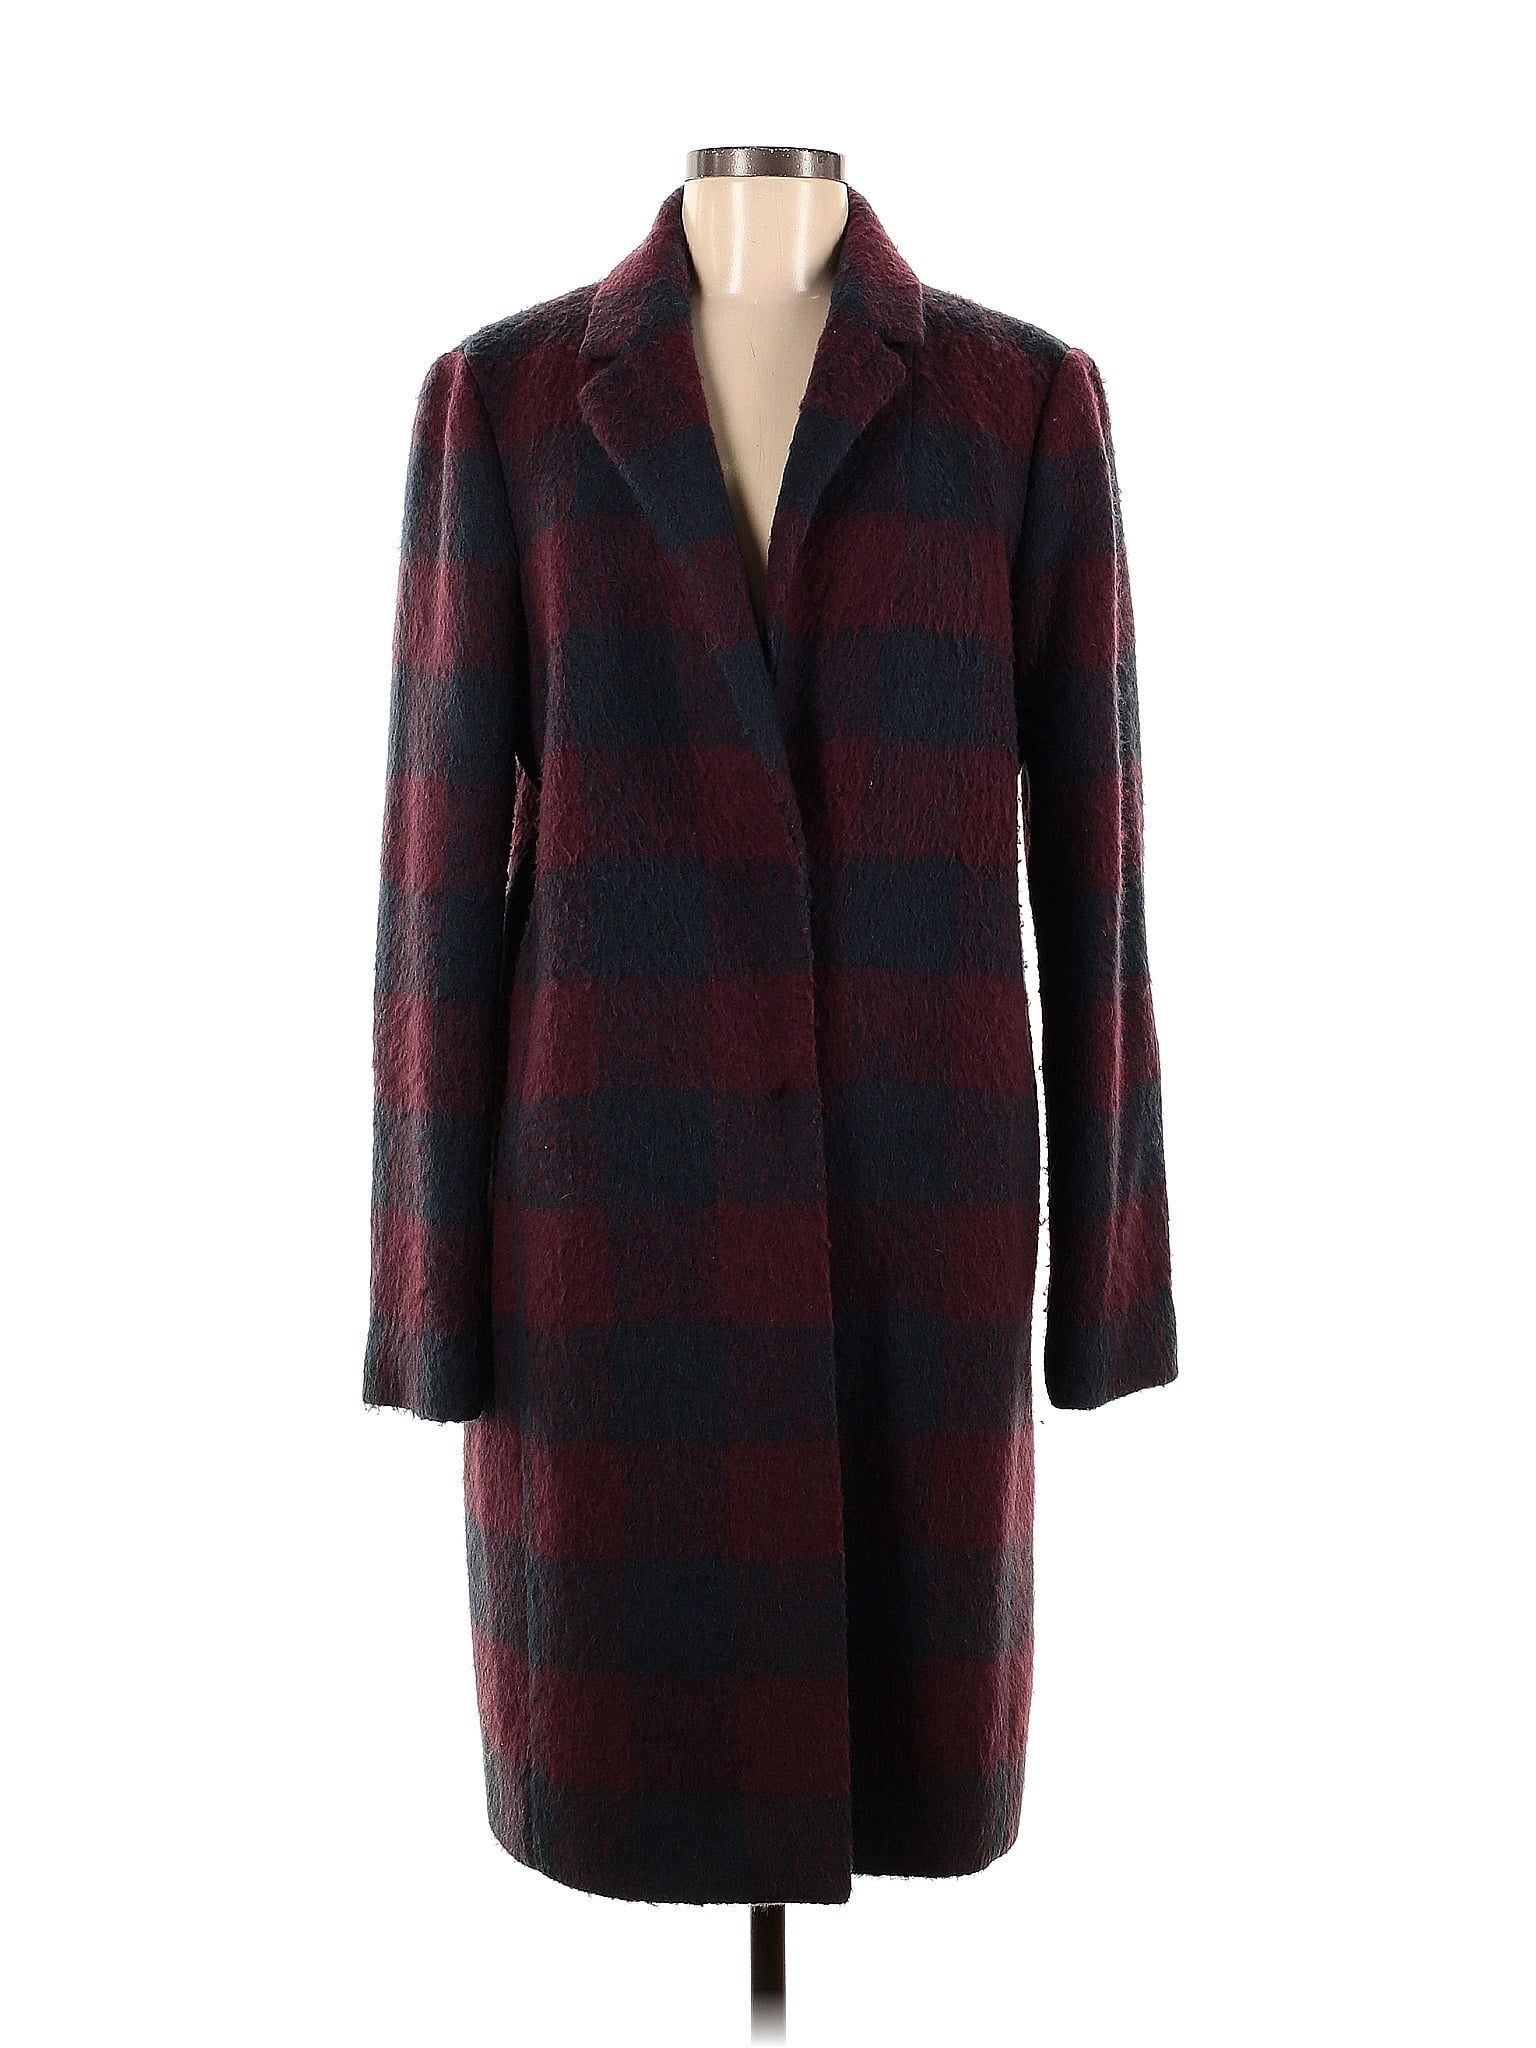 Ann Taylor Checkered-gingham Multi Color Burgundy Coat Size M - 72% off ...